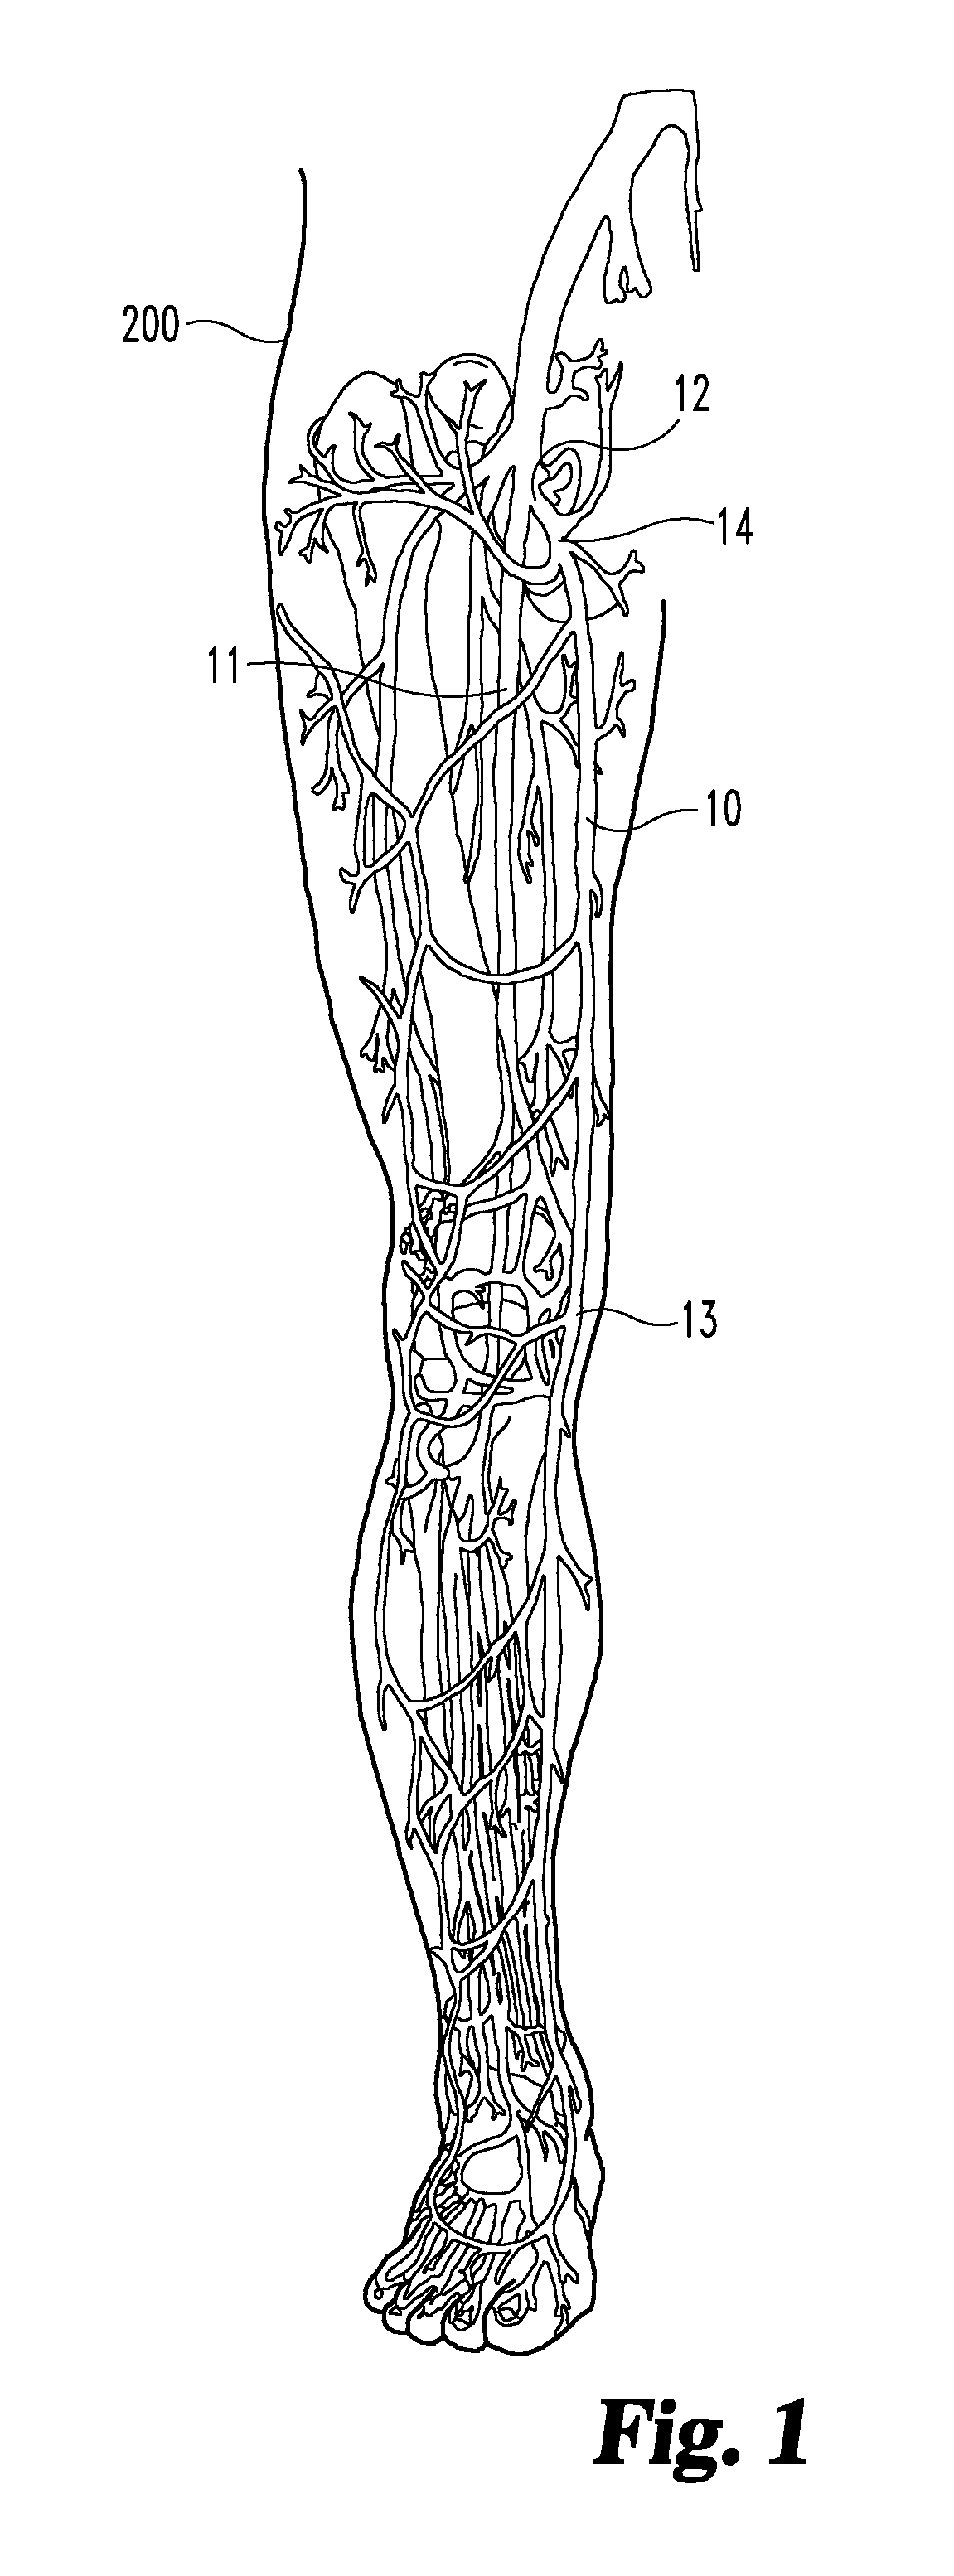 Methods for occluding bodily vessels